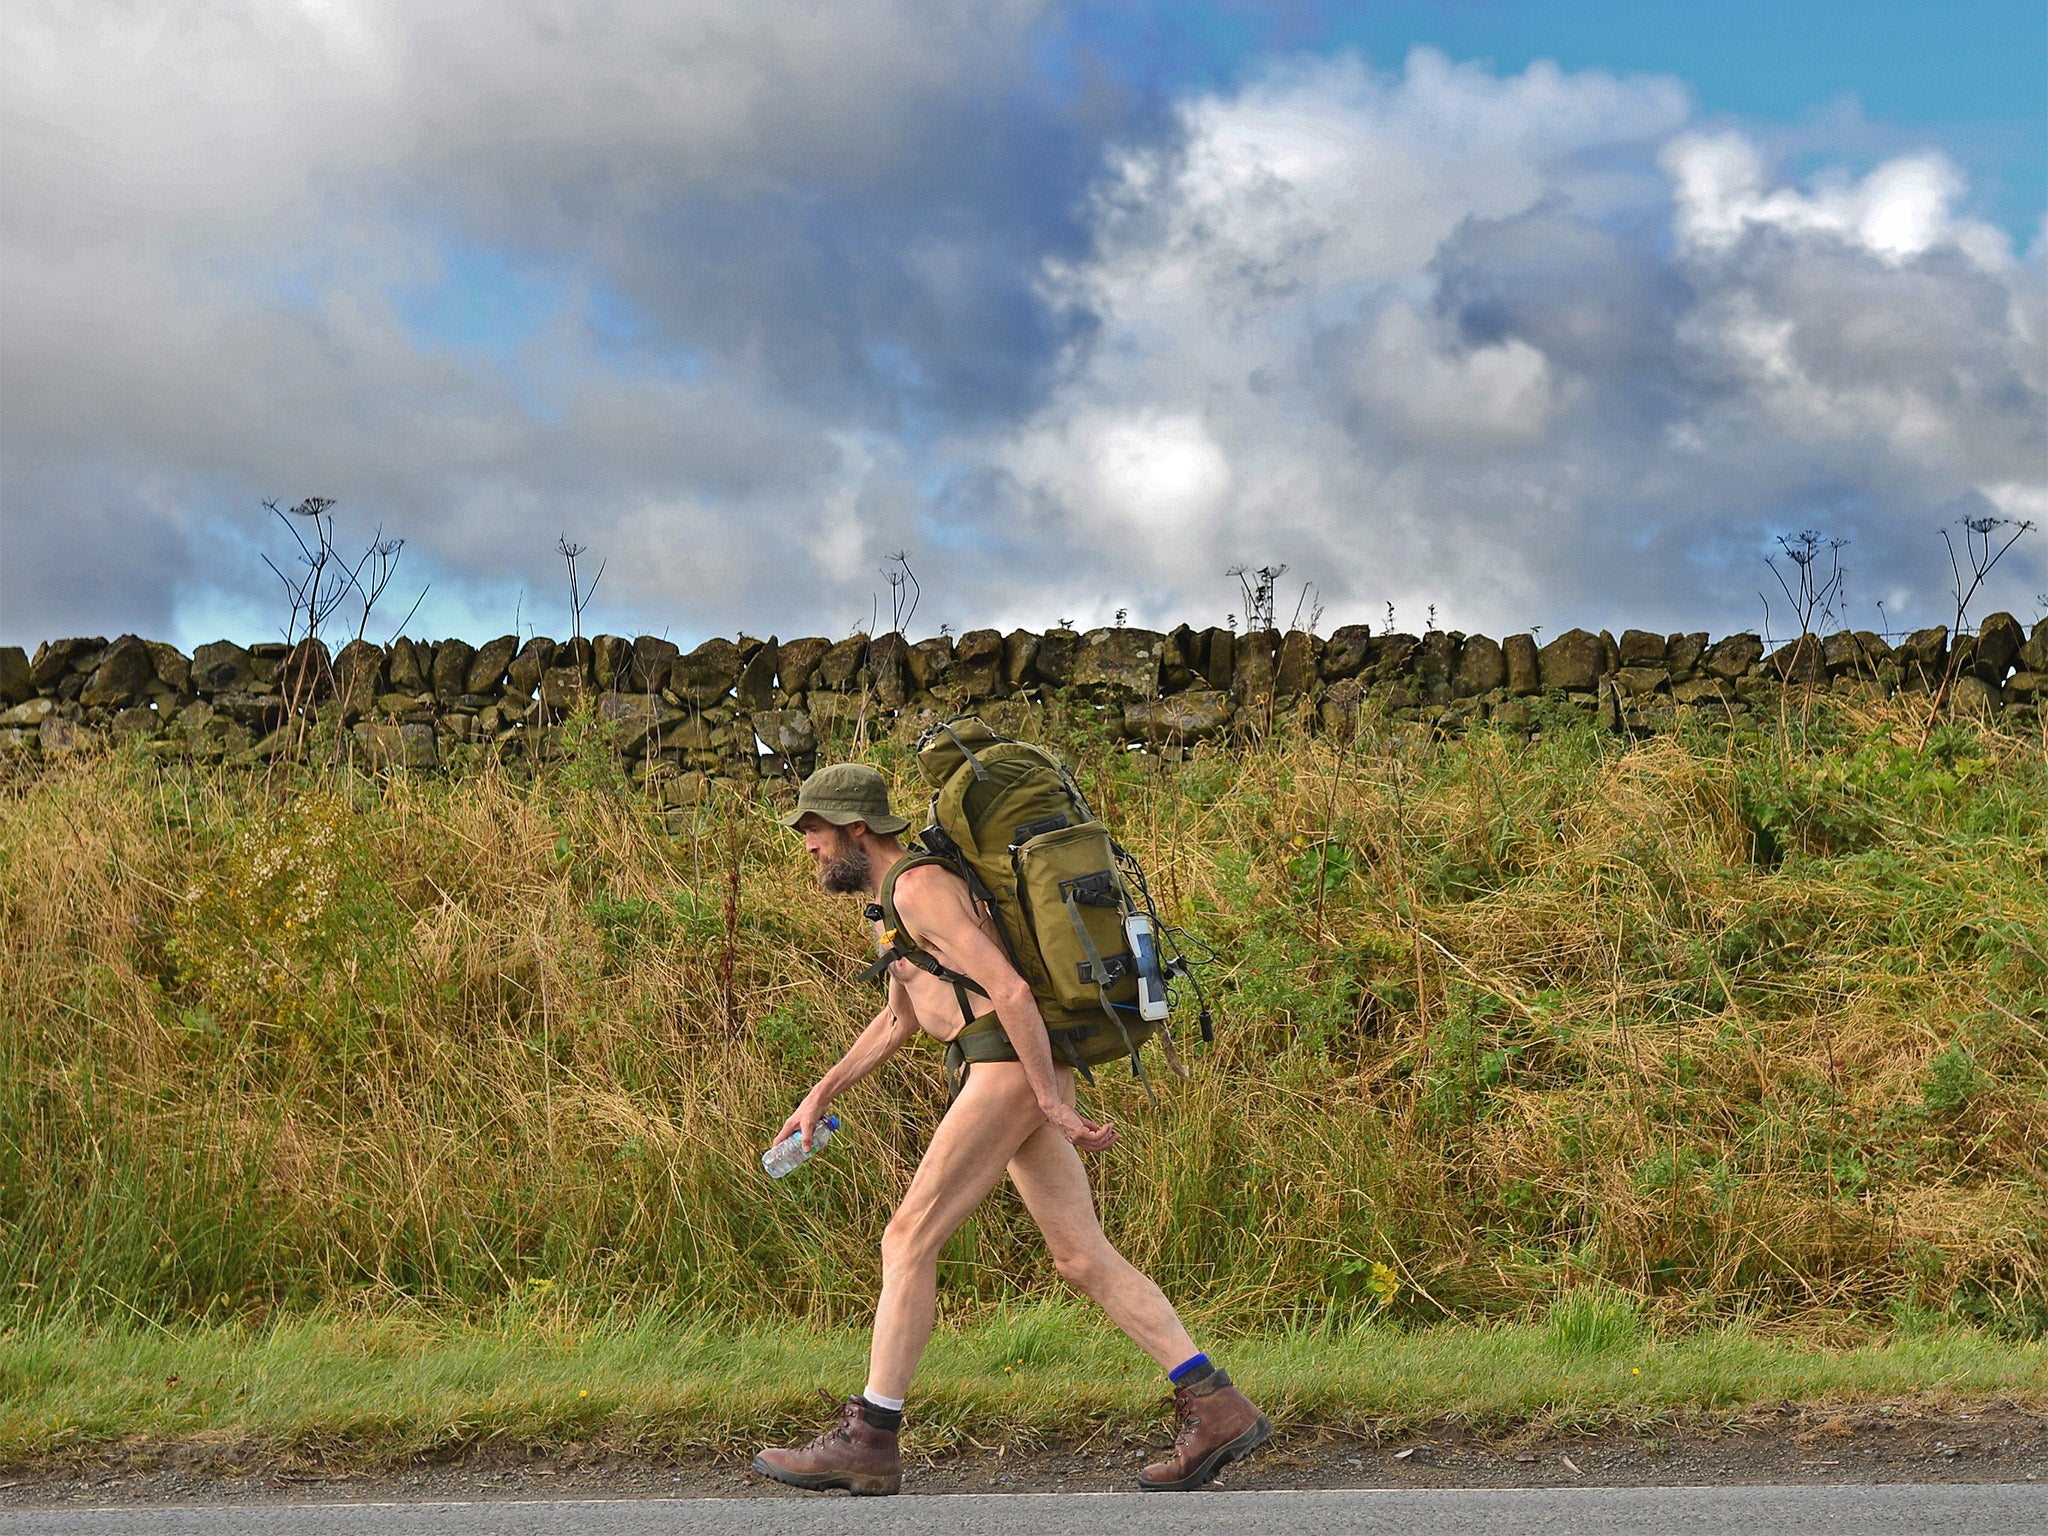 Stephen Gough makes his way south through Peebles in the Scottish Borders, in 2012